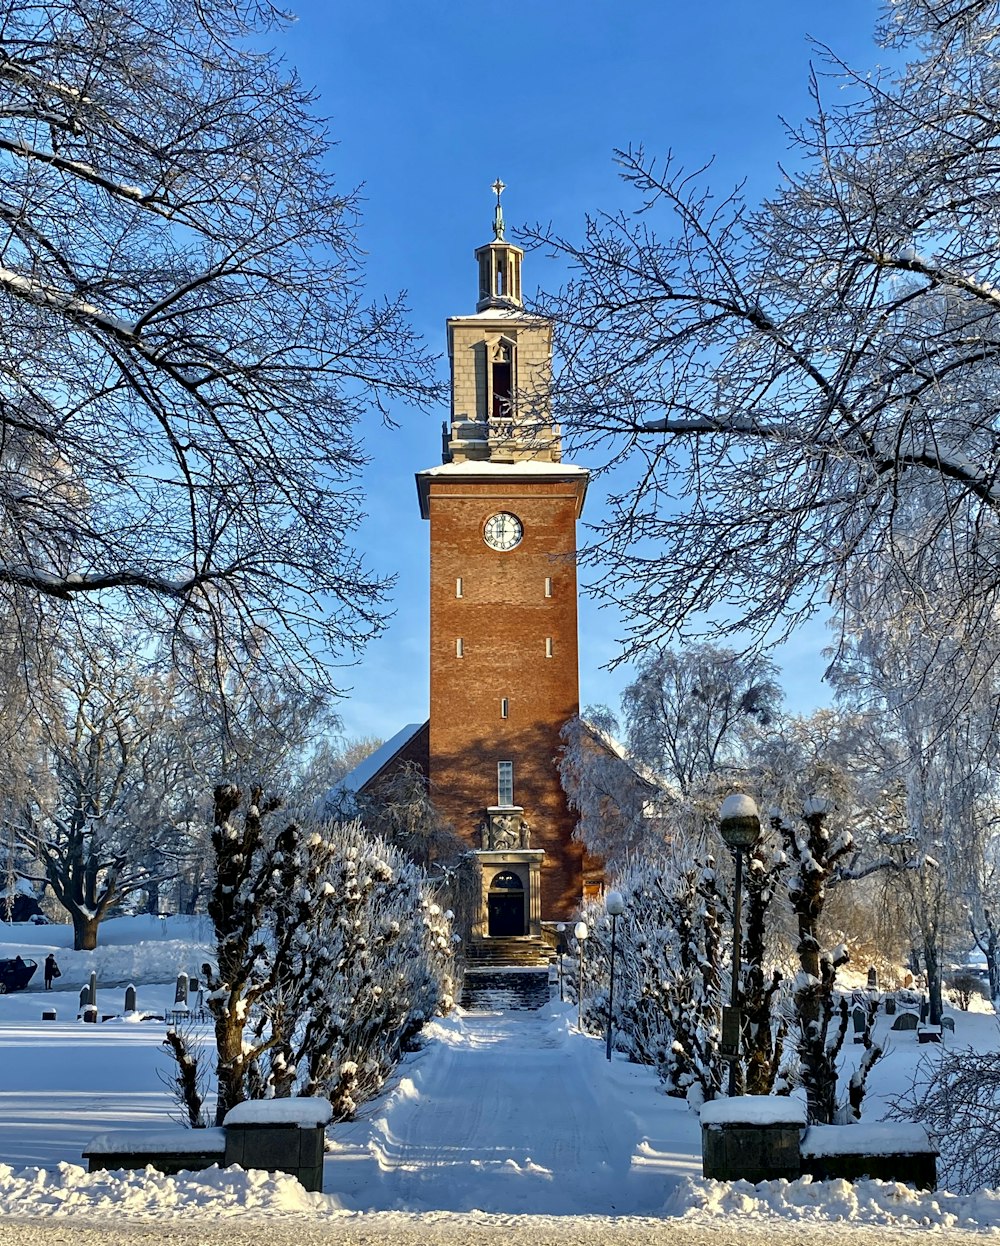 a clock tower in the middle of a snowy park